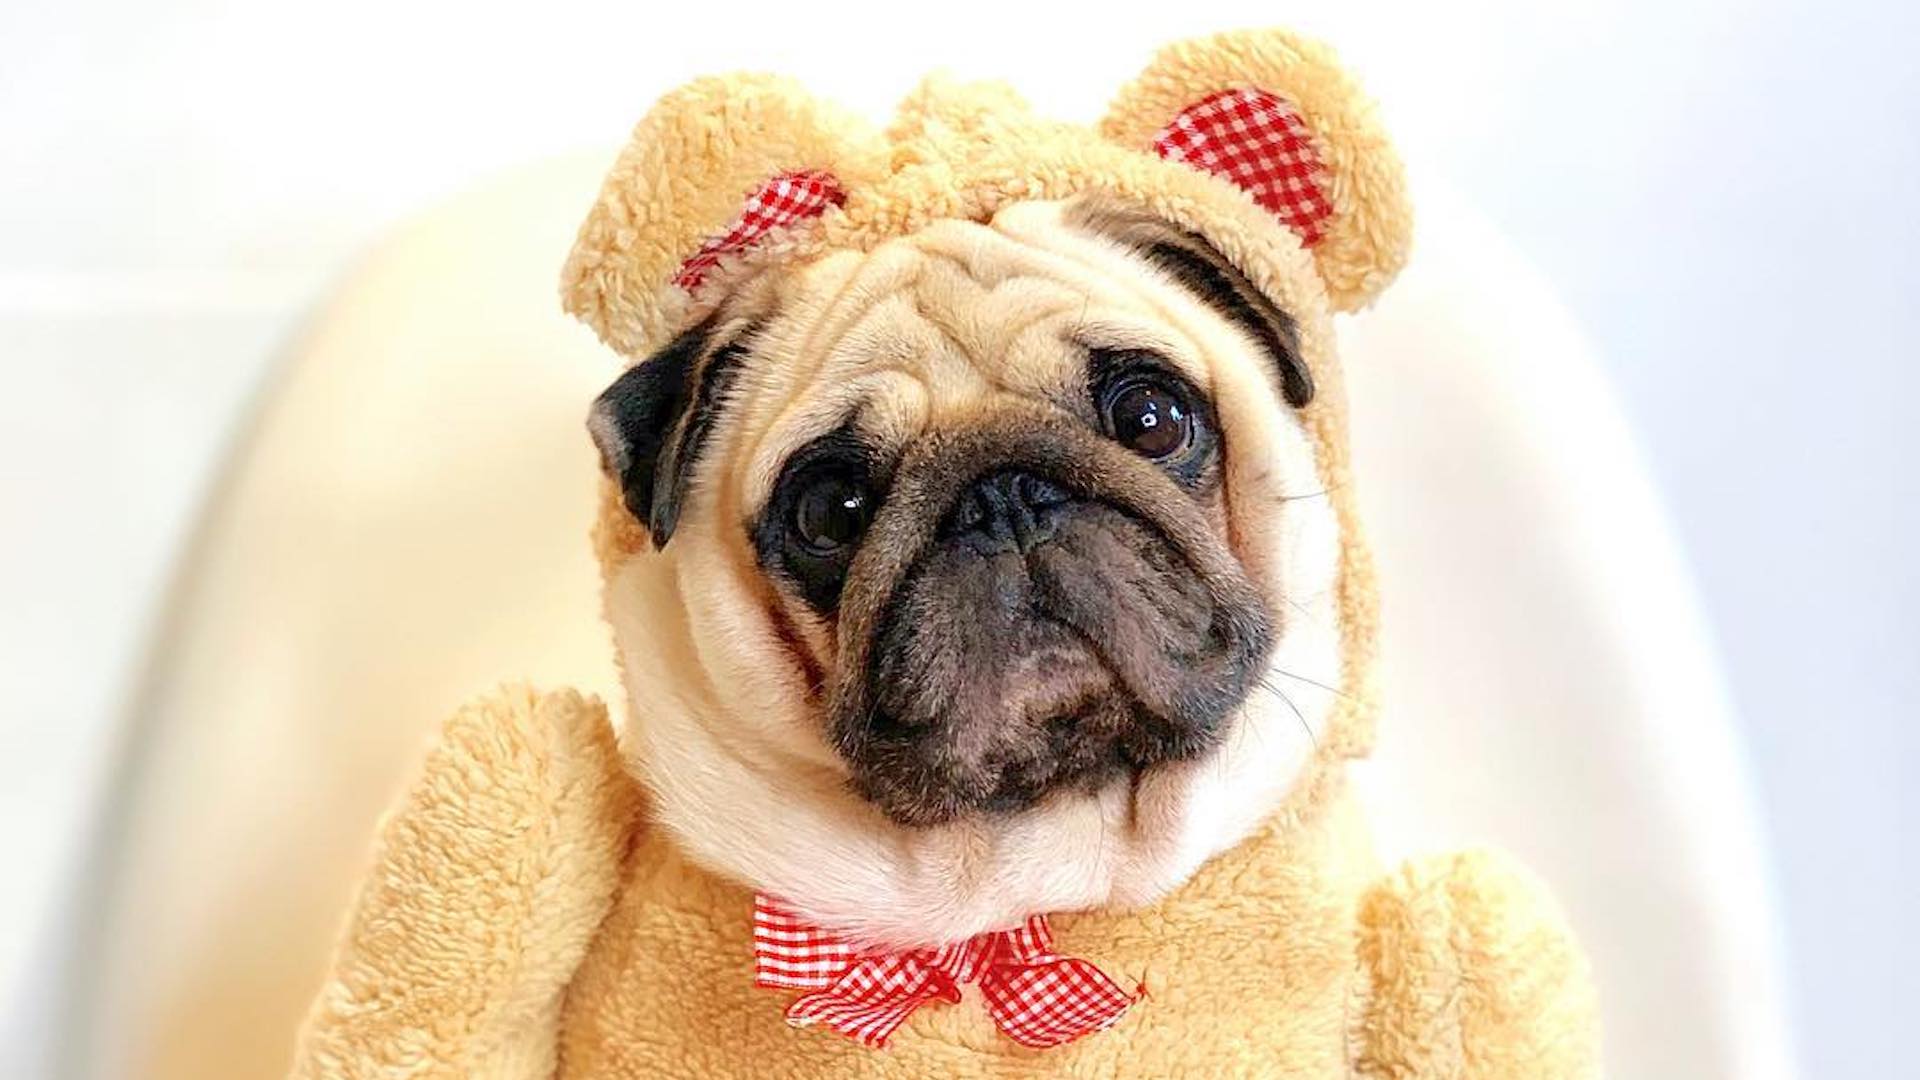 Puggy Smalls dressed as a bear